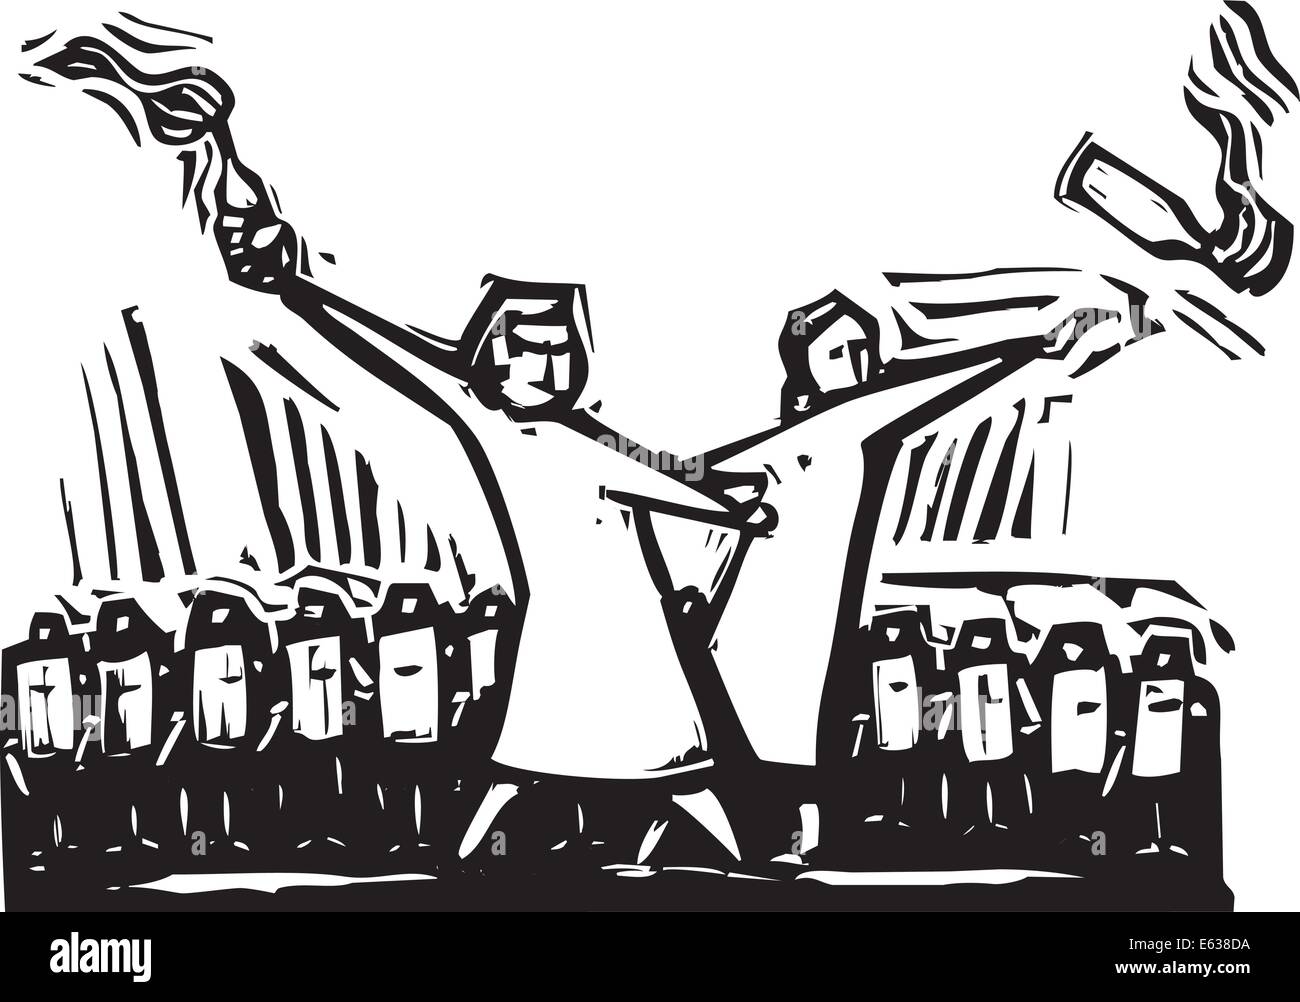 Two woman throwing Molotov cocktails during a protest Stock Vector